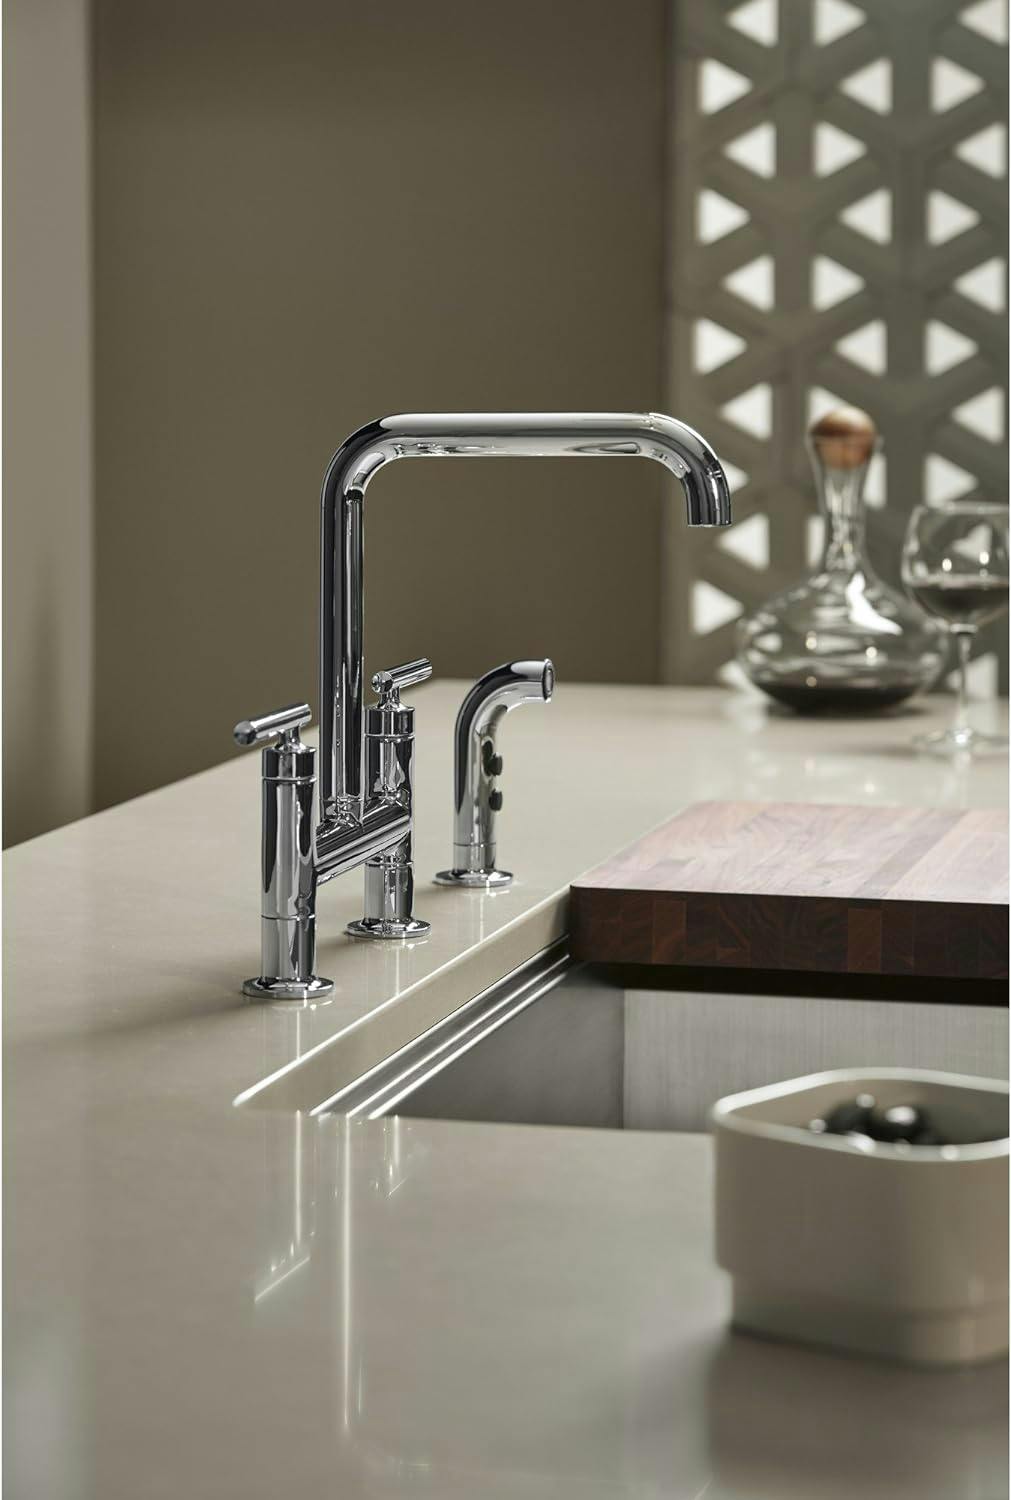 Purist Polished Chrome Double Handle Kitchen Faucet with Pull-Out Spray